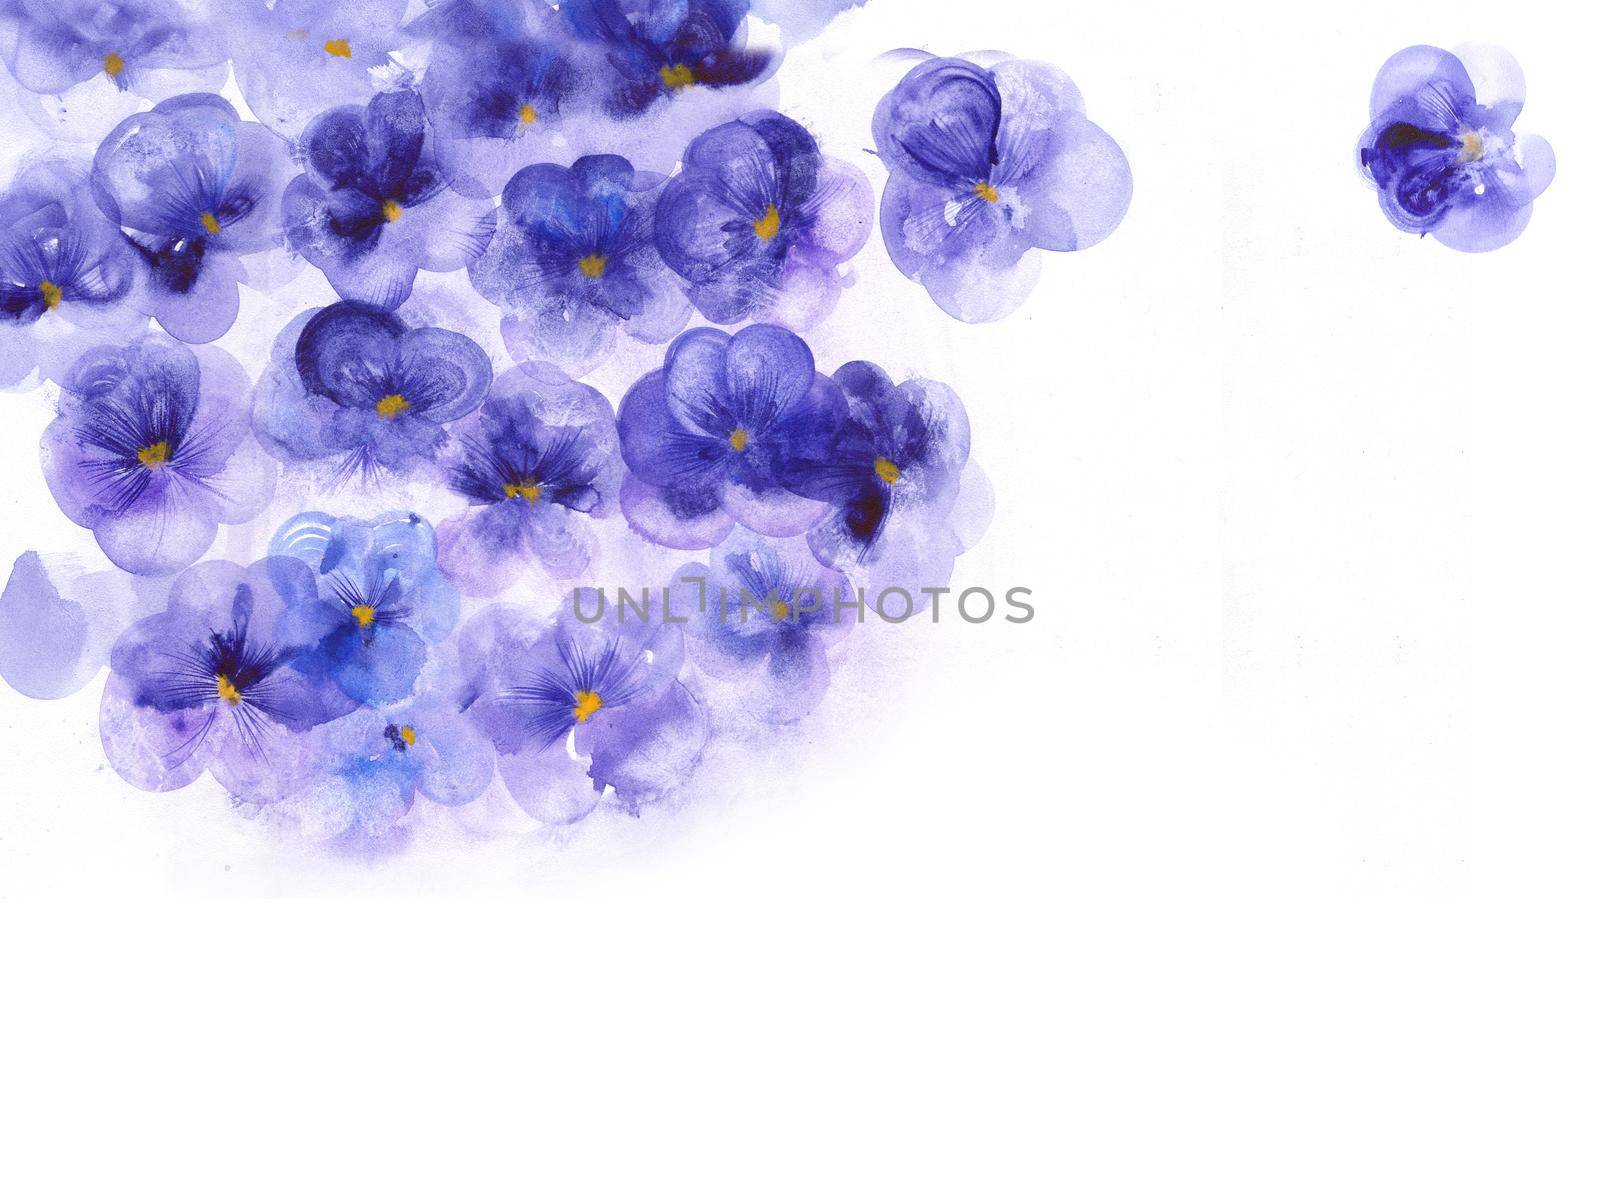 Purple flowers pansies. Template for the elegant design of invitations, cards, greetings or for high-res art prints